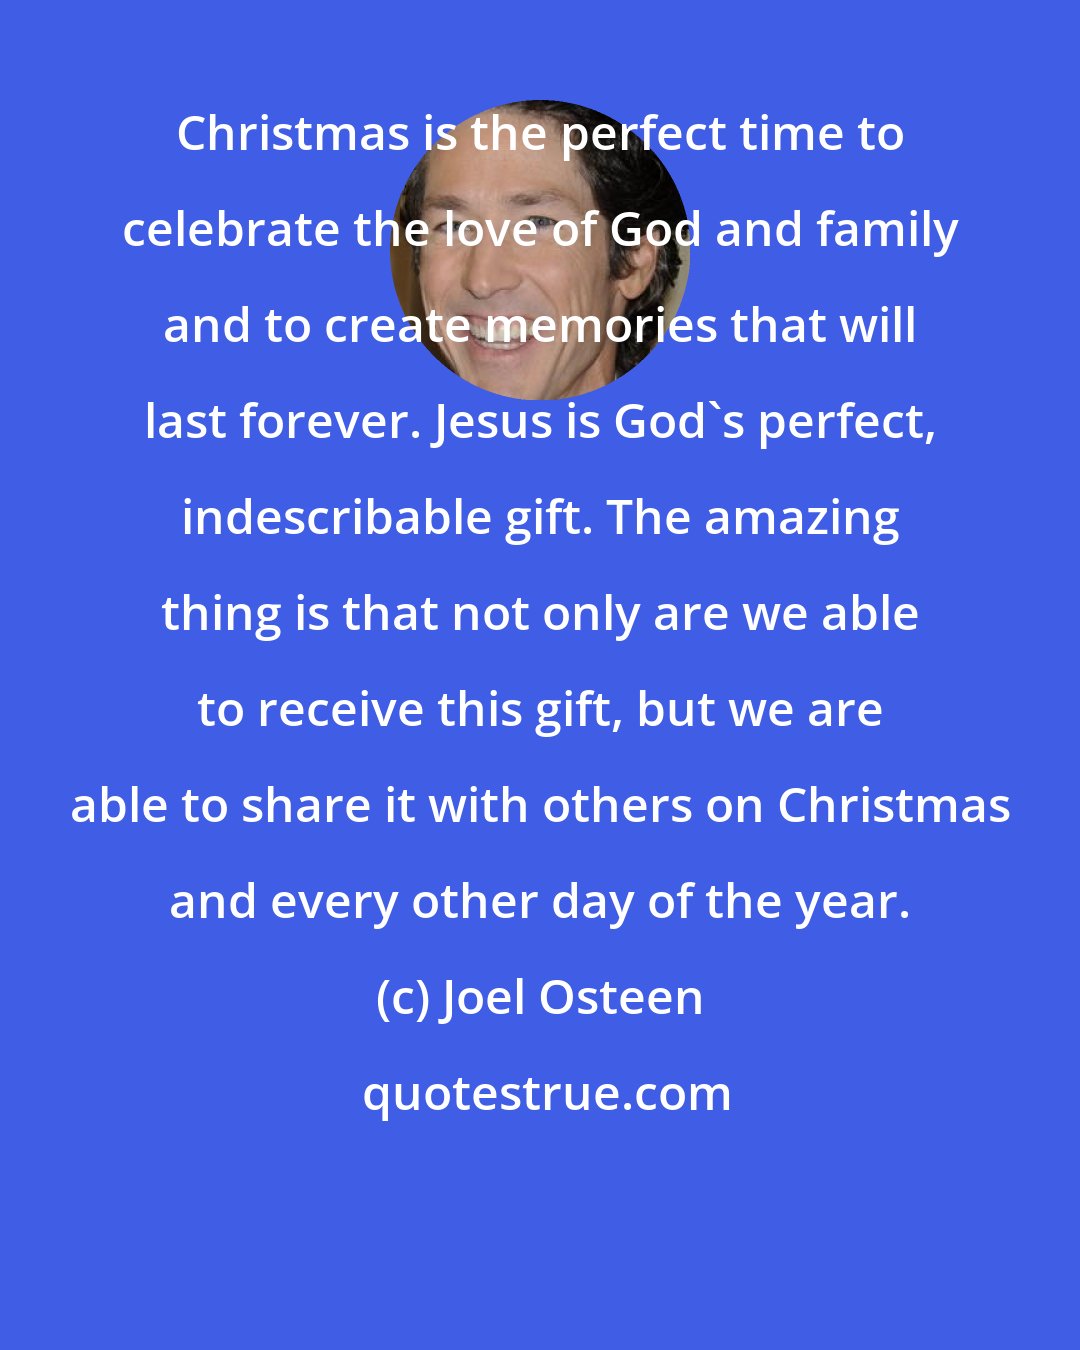 Joel Osteen: Christmas is the perfect time to celebrate the love of God and family and to create memories that will last forever. Jesus is God's perfect, indescribable gift. The amazing thing is that not only are we able to receive this gift, but we are able to share it with others on Christmas and every other day of the year.